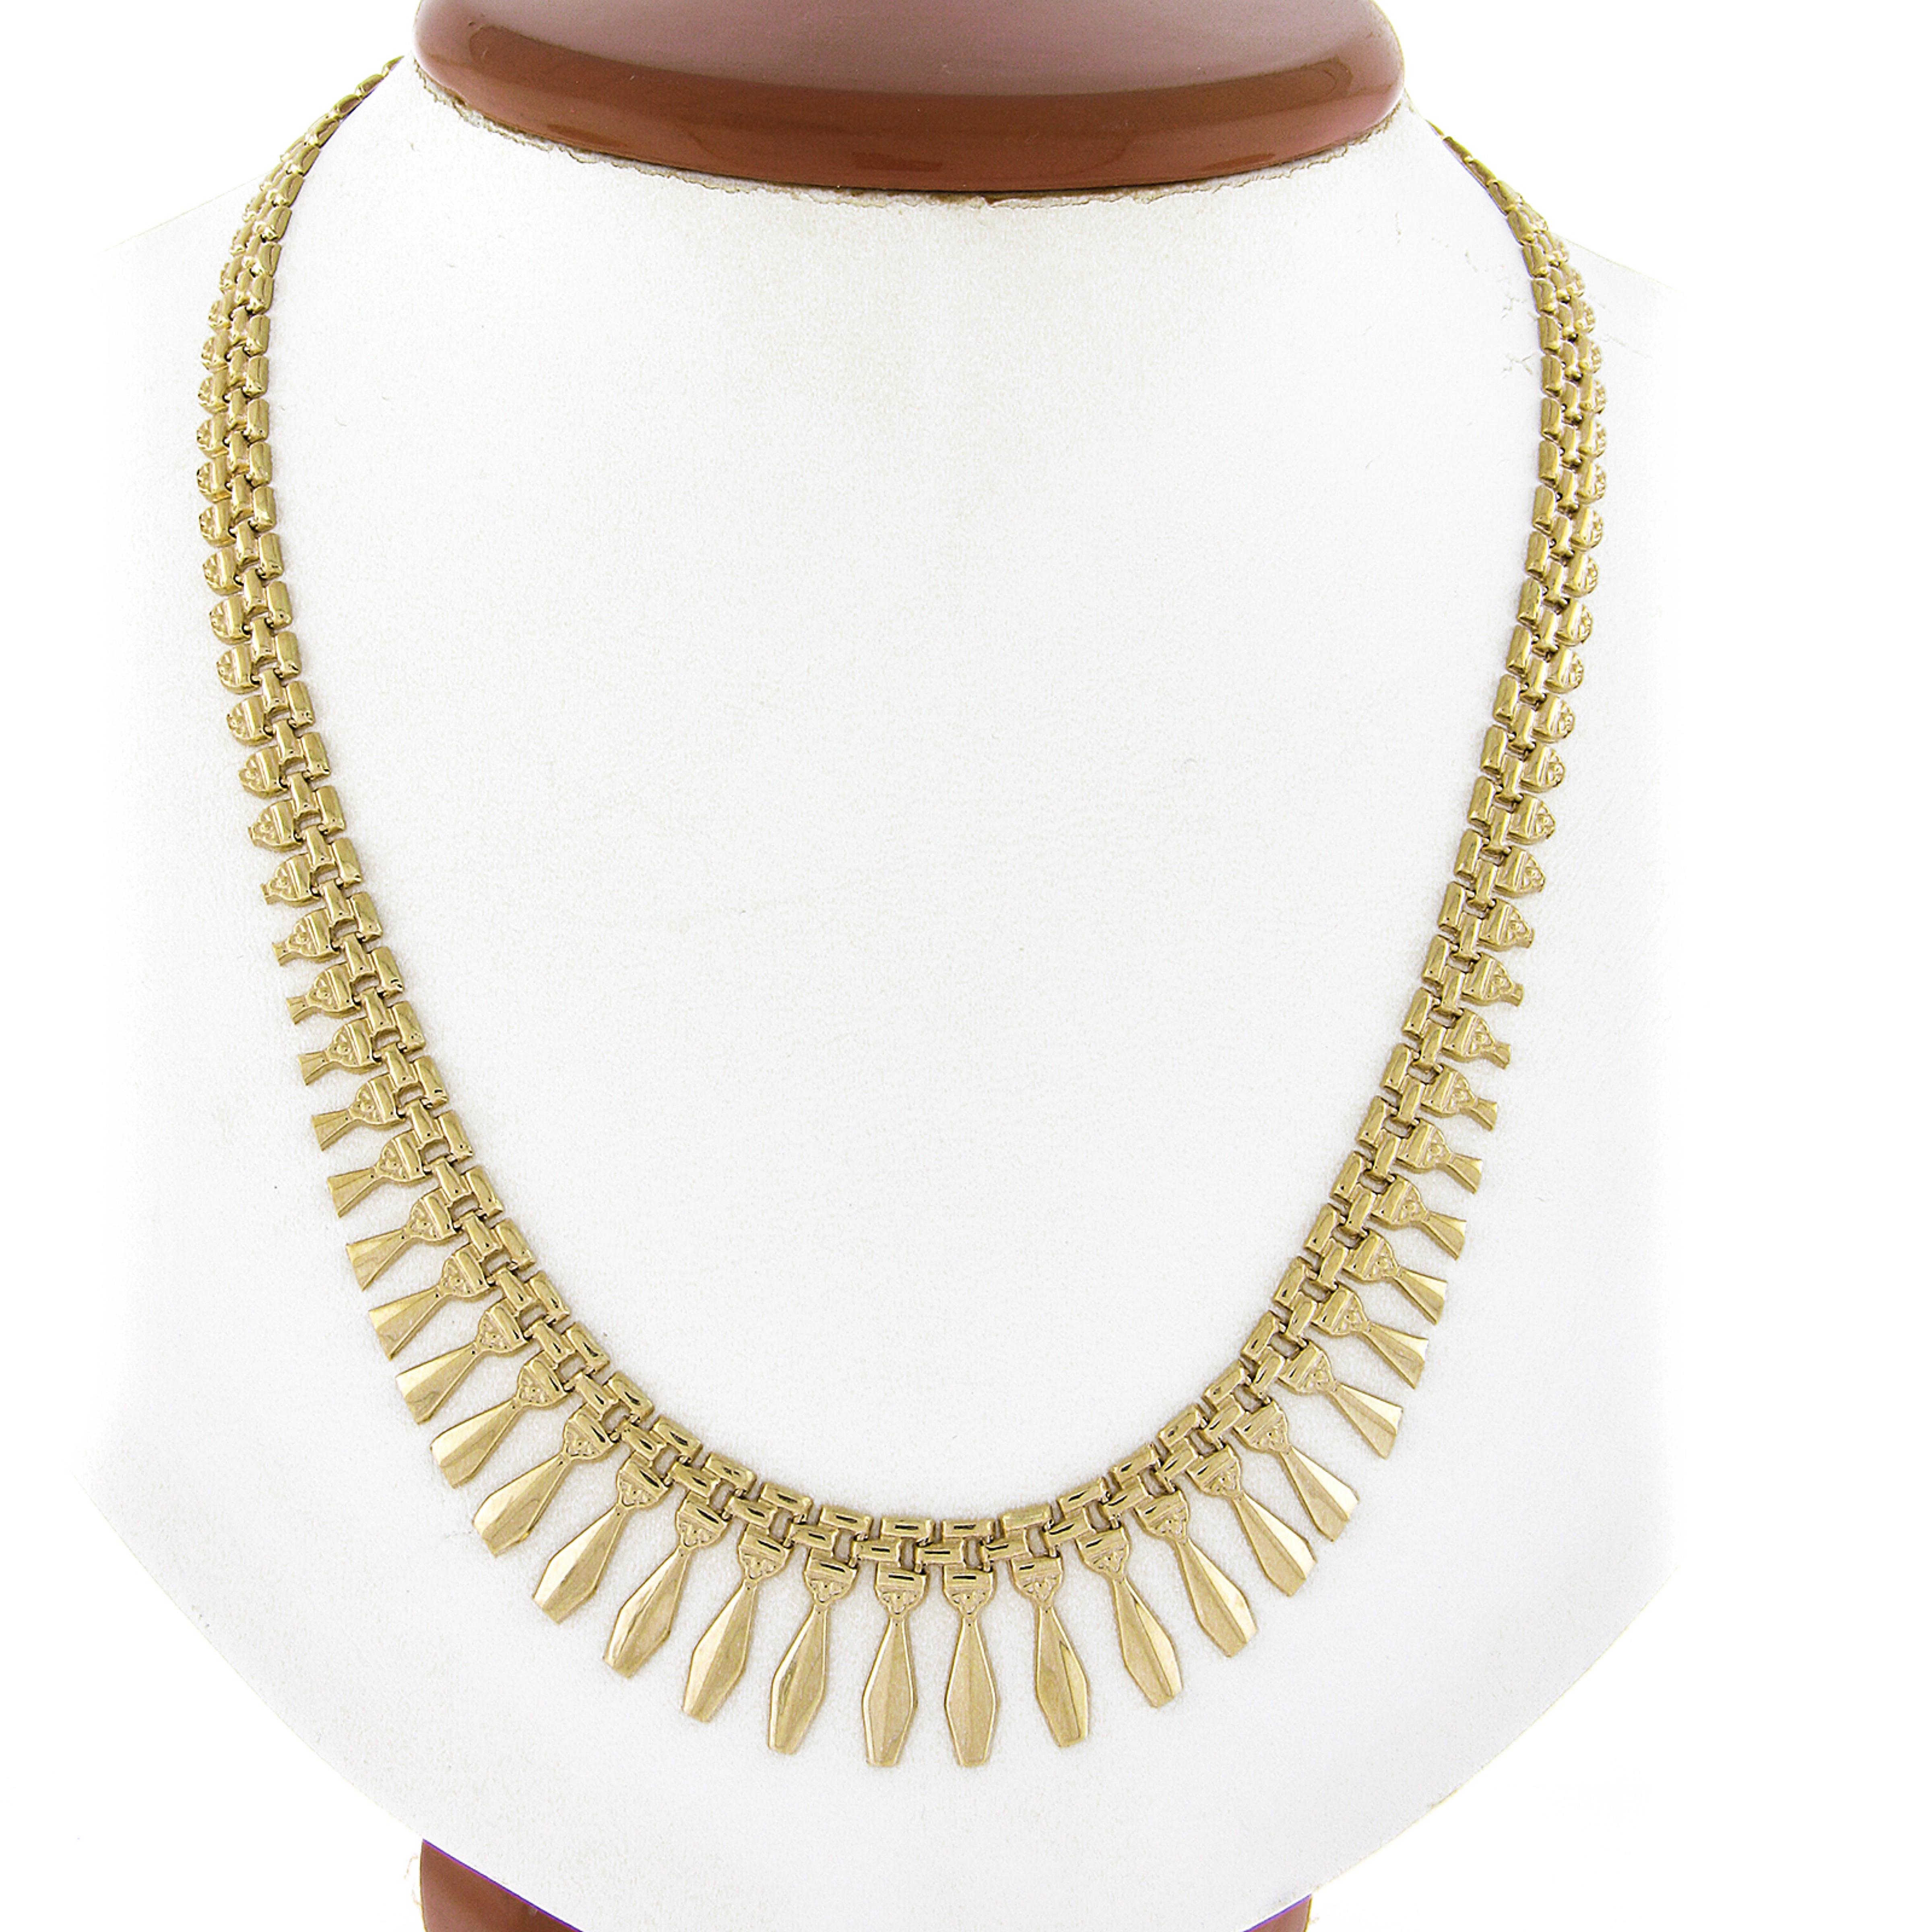 Here we have a Italian fancy fringe collar link chain necklace that is 18 inches in total length. The chain is solid 14k yellow gold with a sturdy box clasp. The center section features a graduated geometric dangles. This interesting and